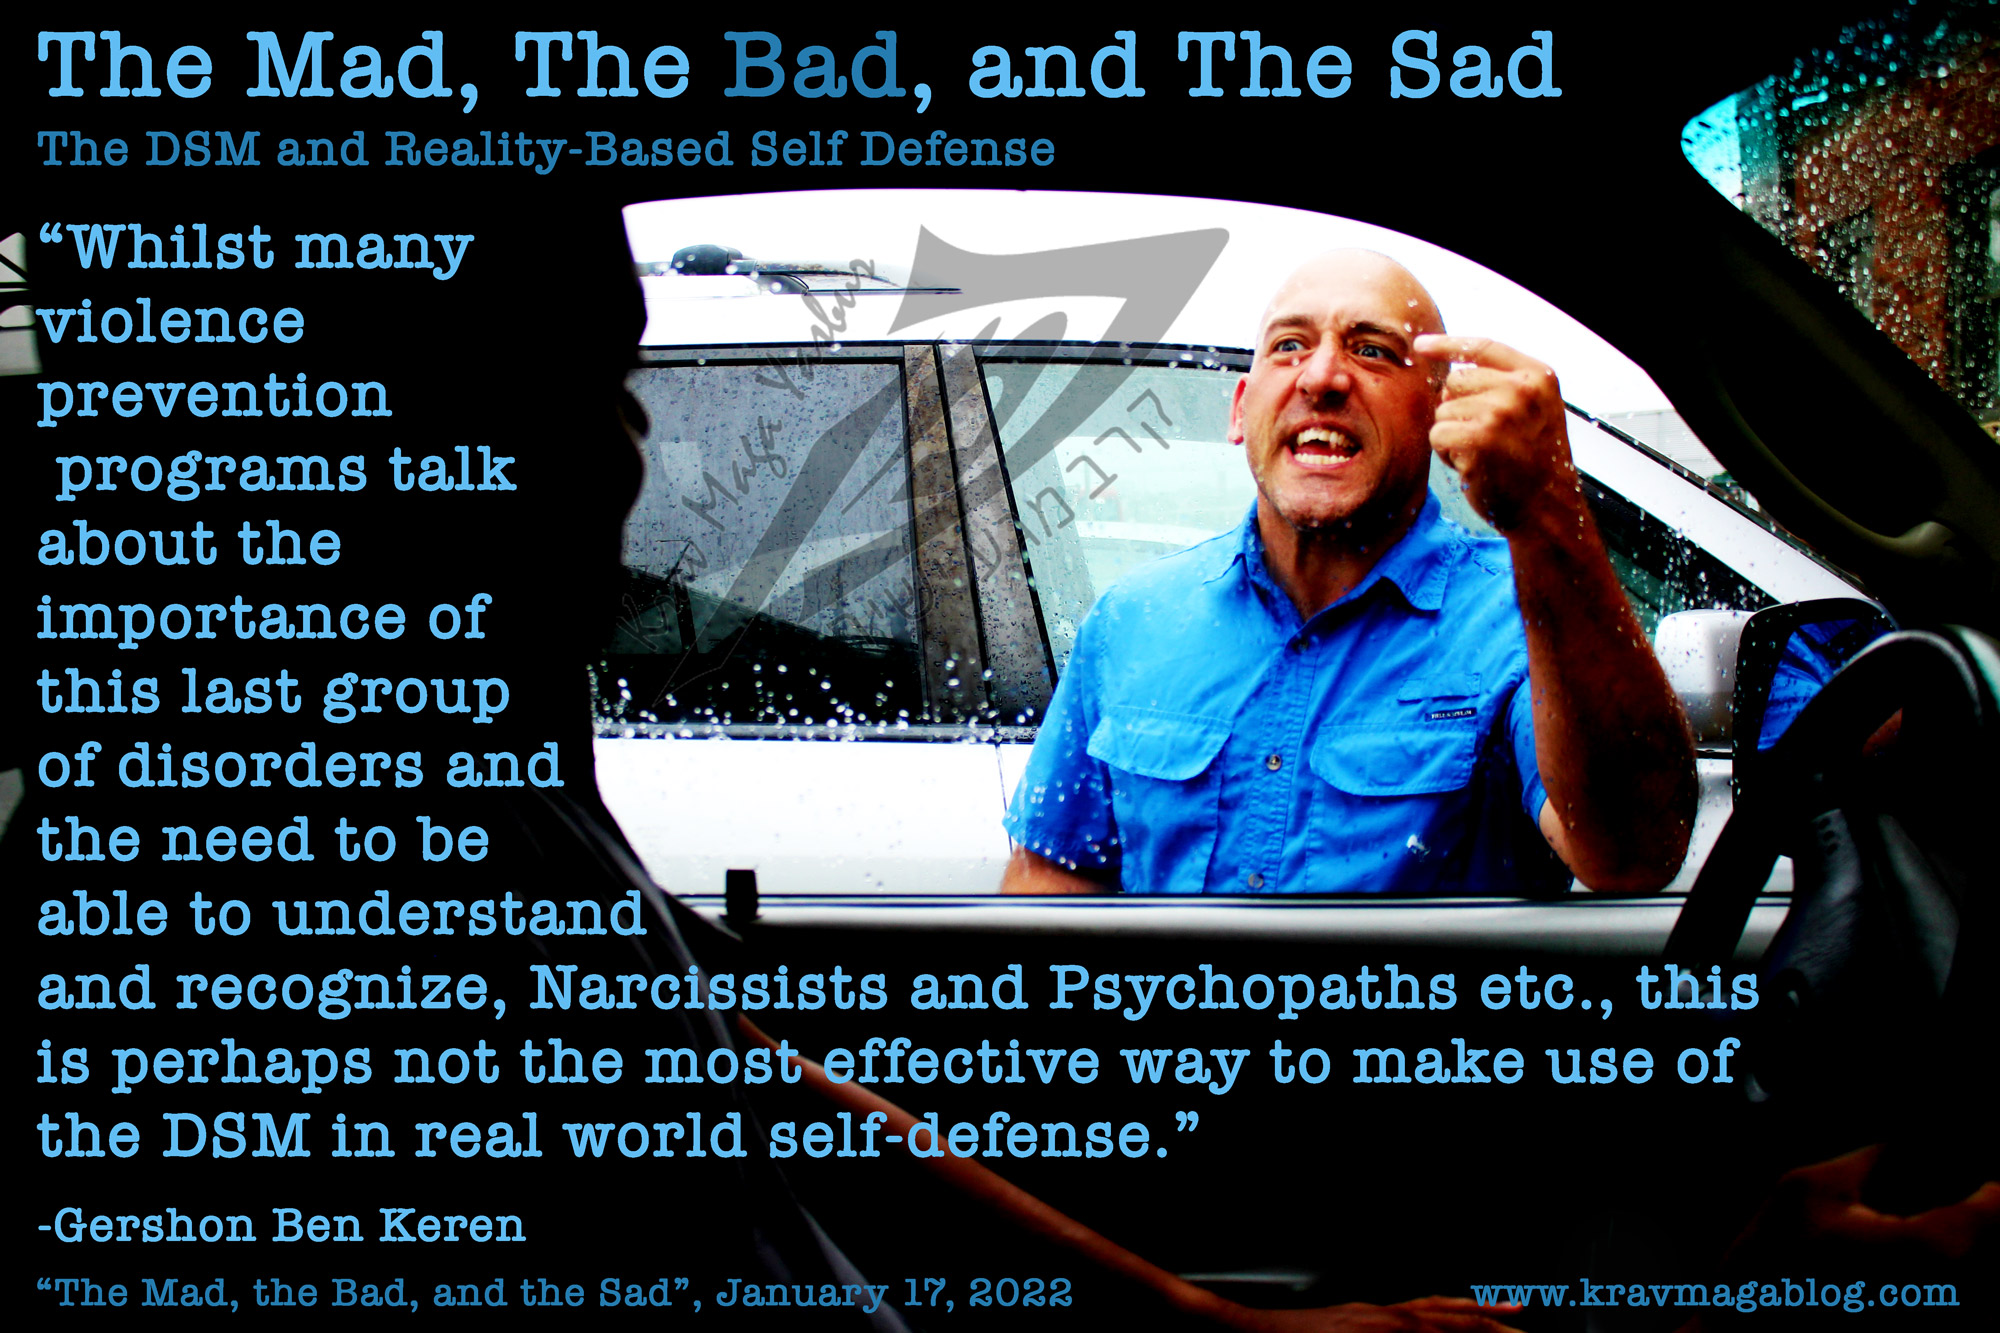 Blog About The Mad, the Bad and The Sad